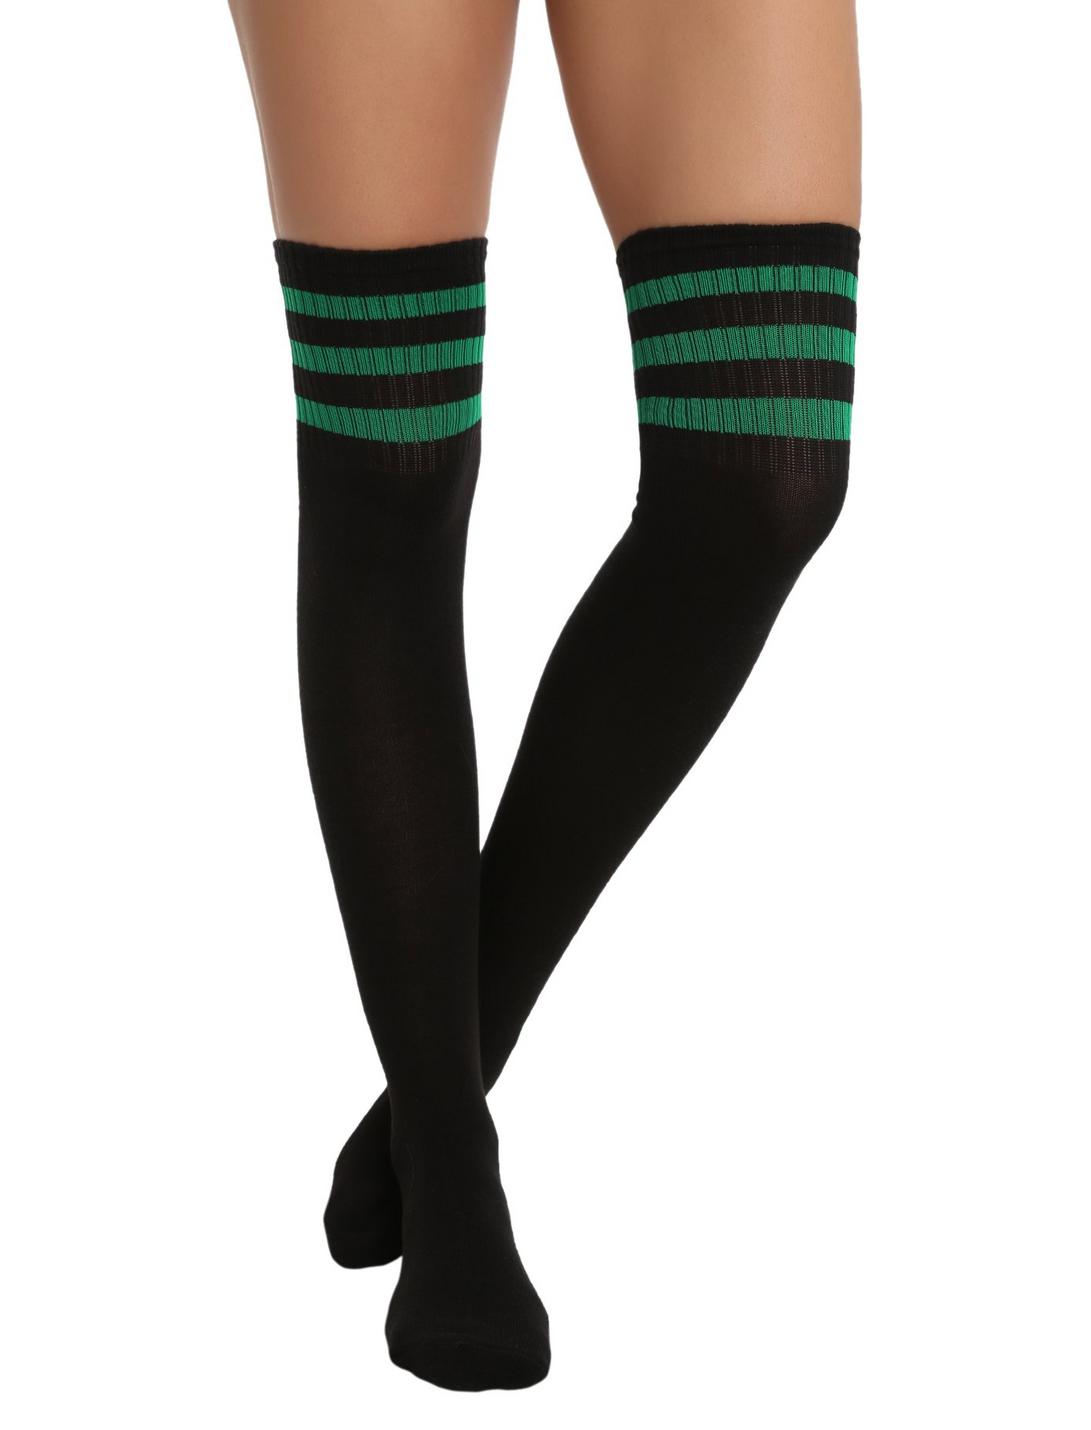 Black And Green Over-The-Knee Crew Socks, , hi-res